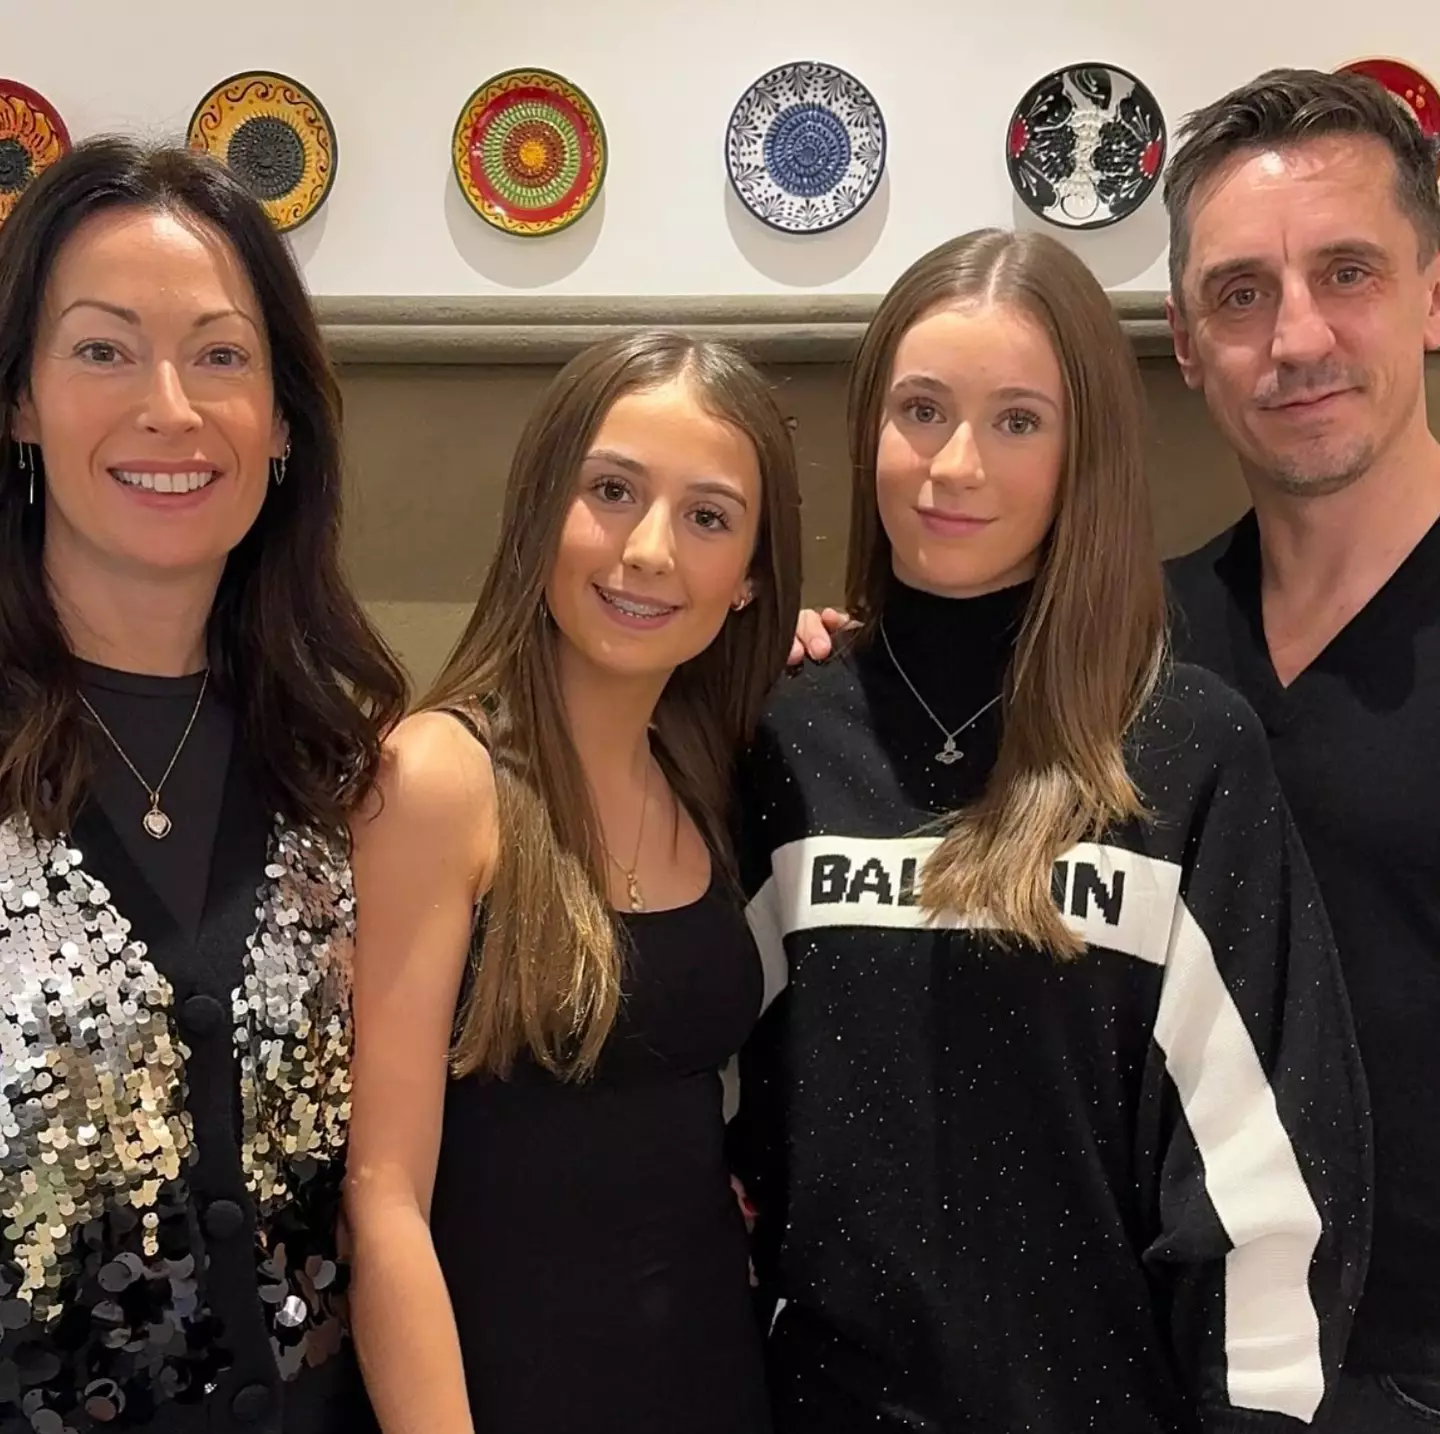 Gary Neville, wife Emma and their two daughters.